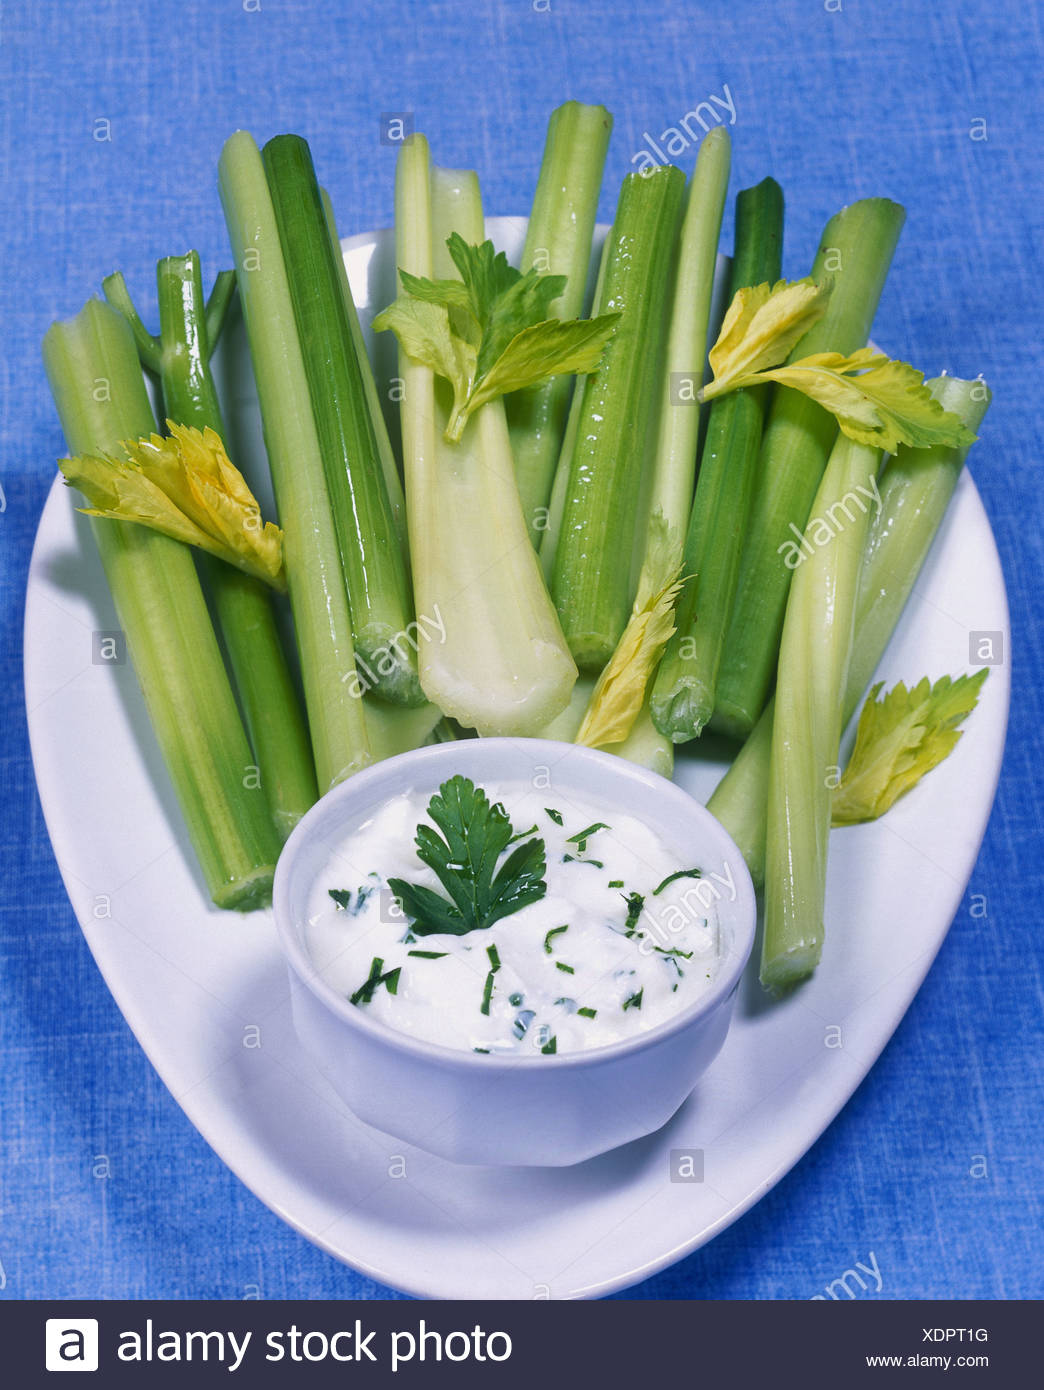 Petiolate Celery With Cottage Cheese Dip Stock Photo 283858220